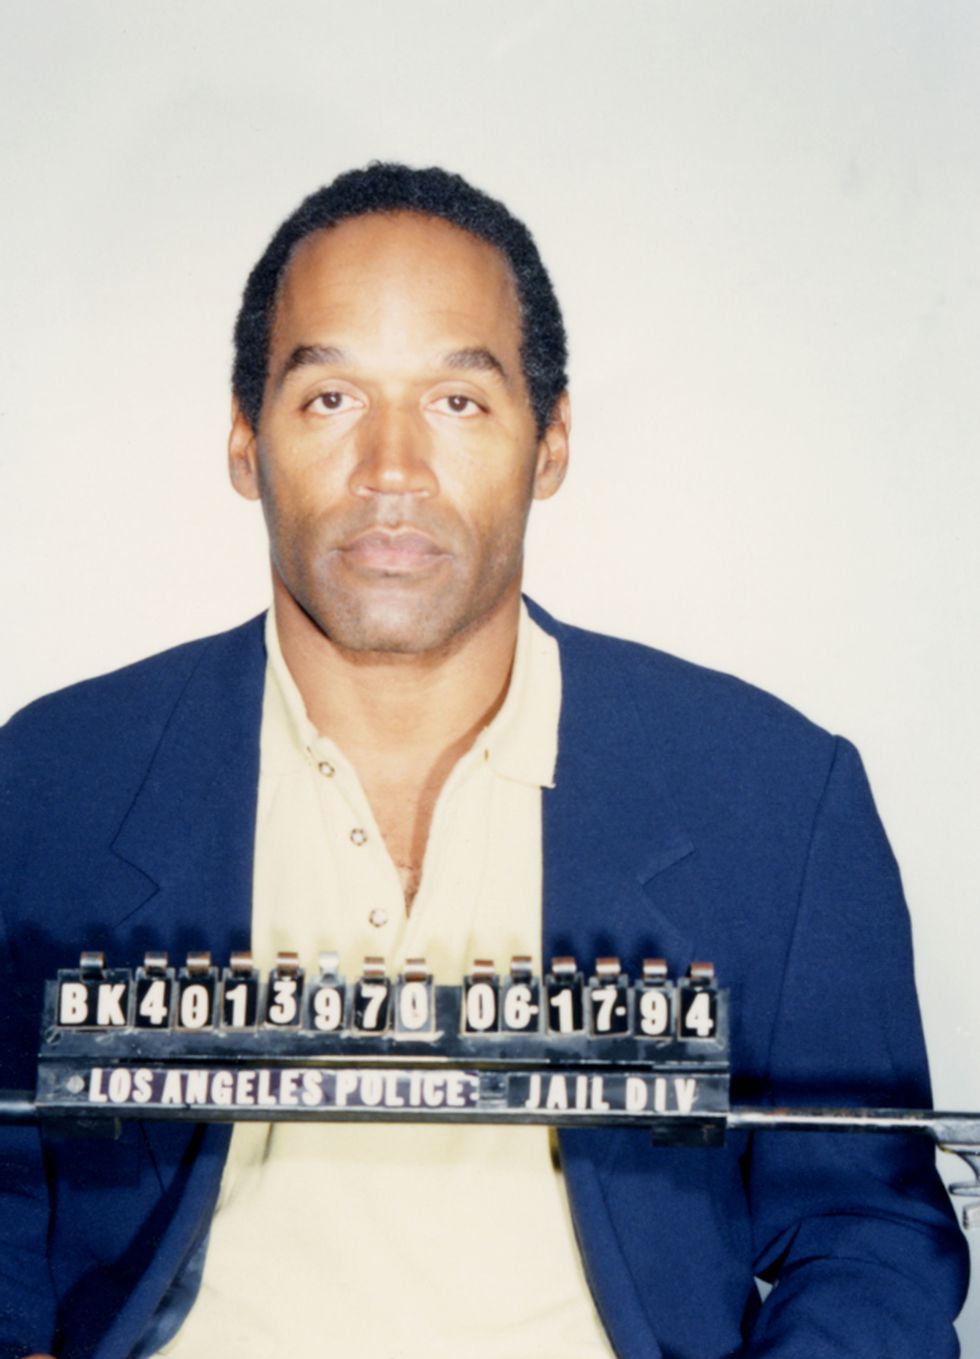 A bloody knife has been found on the property of OJ Simpson